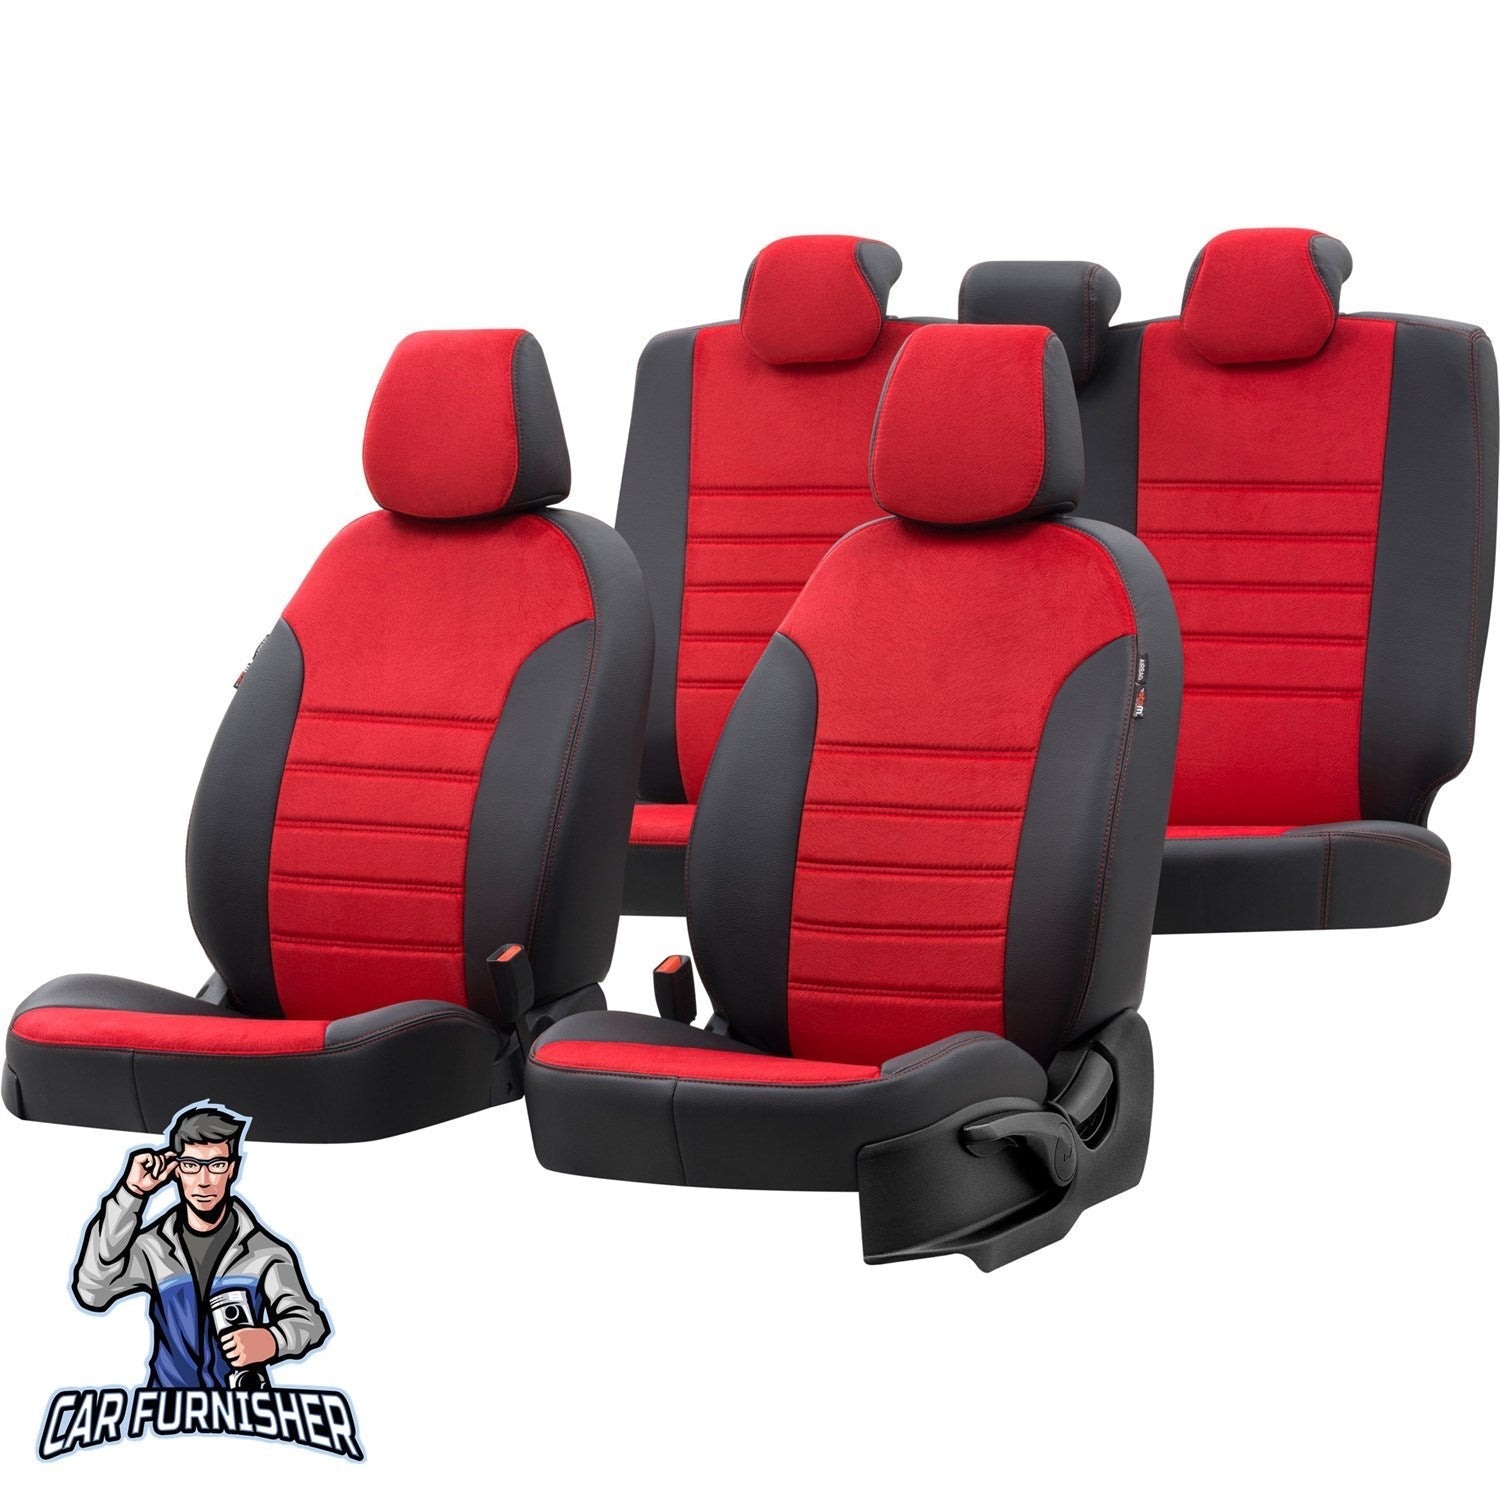 Renault Broadway Car Seat Covers 1983-2001 London Design Red Full Set (5 Seats + Handrest) Leather & Fabric